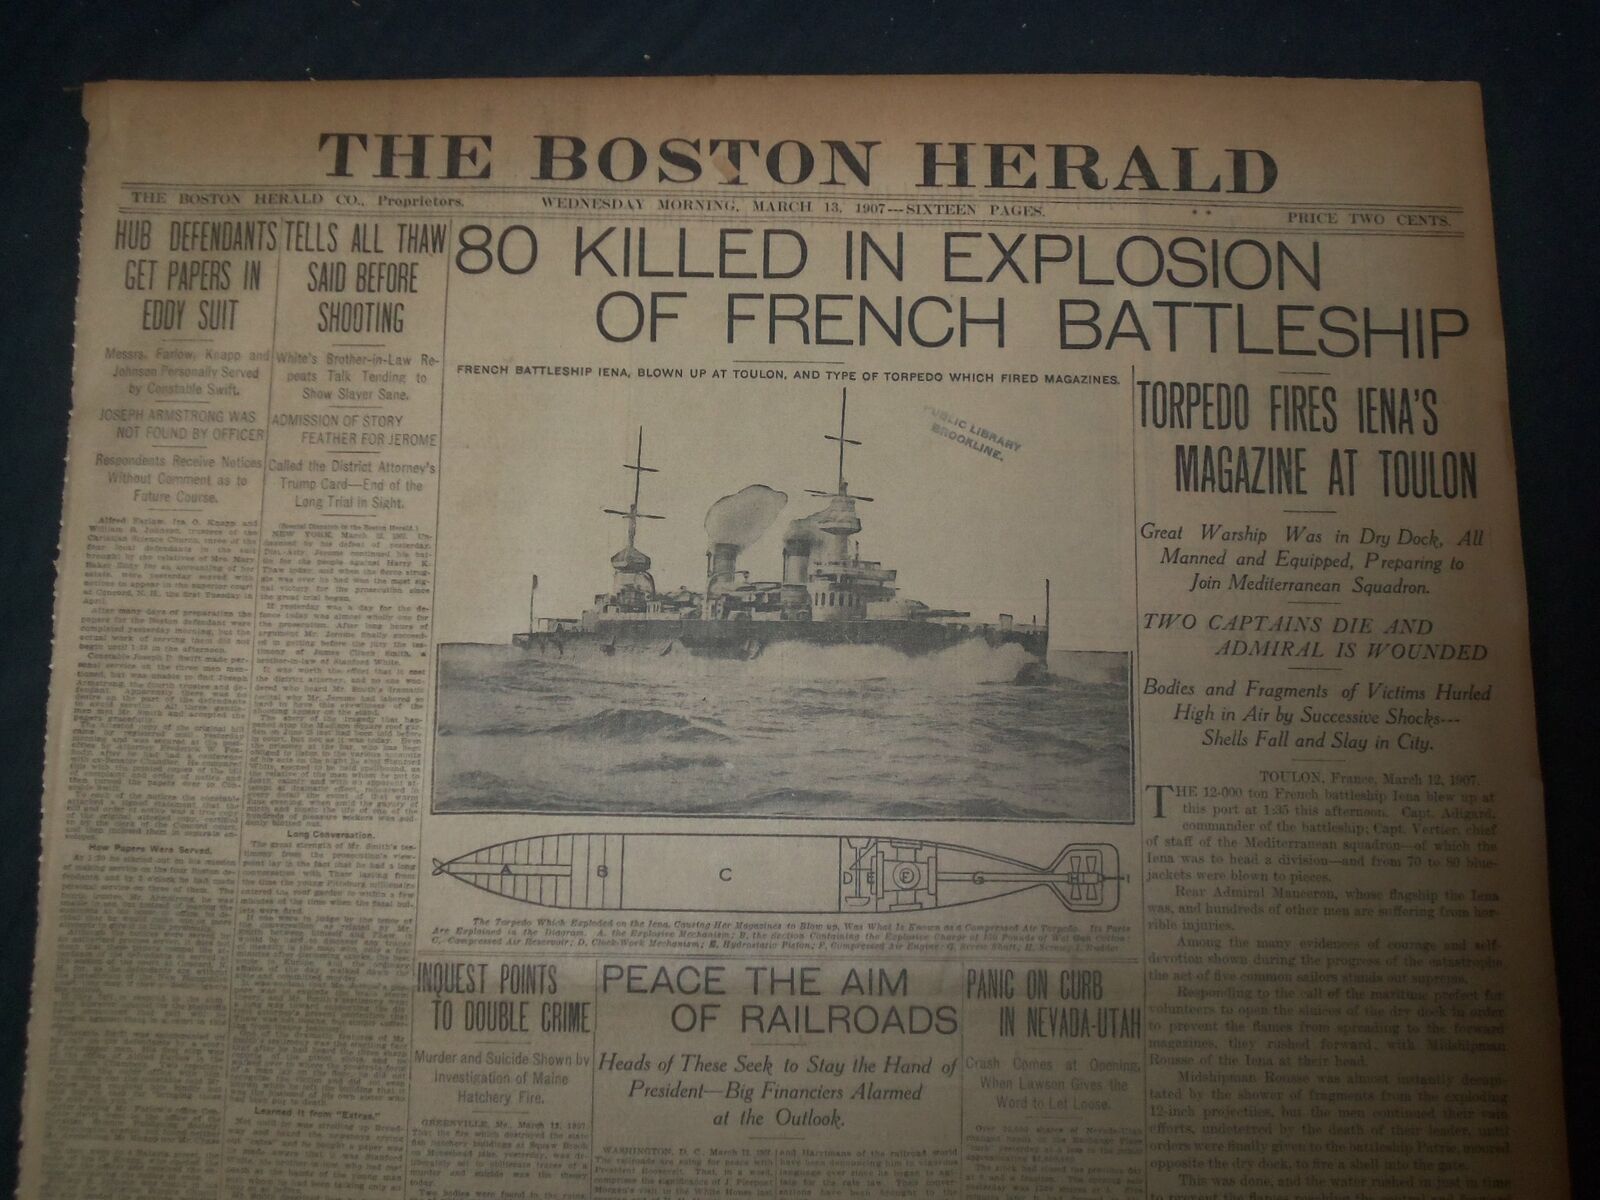 1907 MAR 13 THE BOSTON HERALD-80 KILLED IN EXPLOSION OF FRENCH BATTLESHIP -BH 10